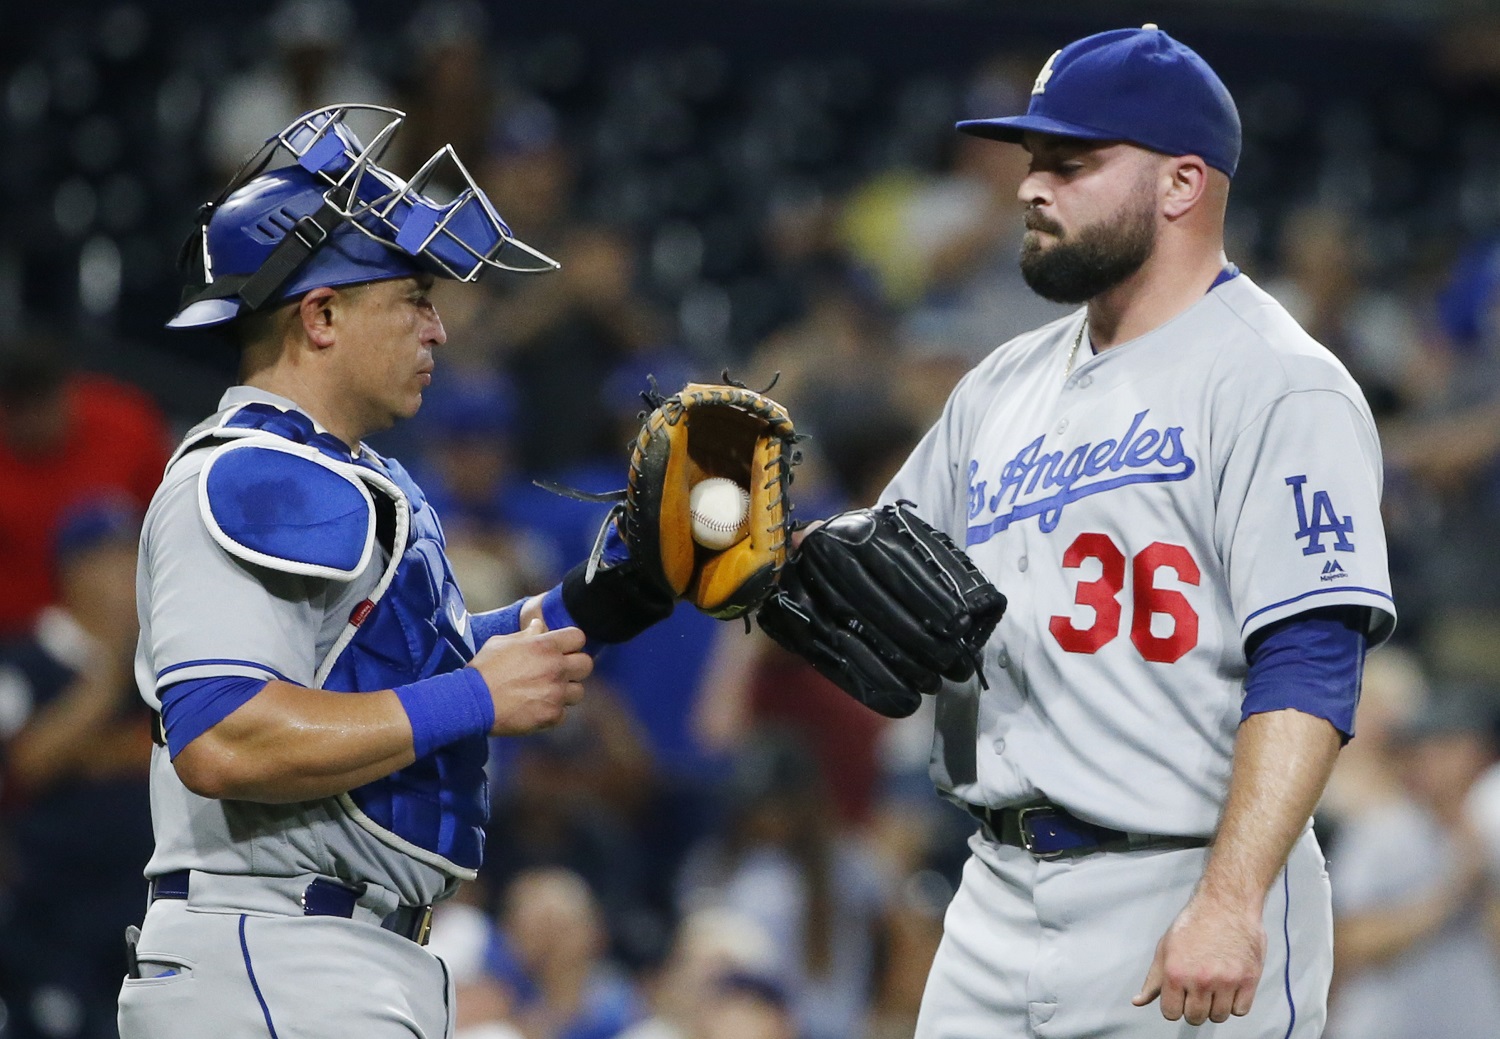 Los Angeles Dodgers relief pitcher Adam Liberatore and catcher Carlos Ruiz bump gloves after the Dodgers' 9-4 victory over the San Diego Padres in a baseball game Thursday, Sept. 29, 2016, in San Diego. (AP Photo/Lenny Ignelzi)